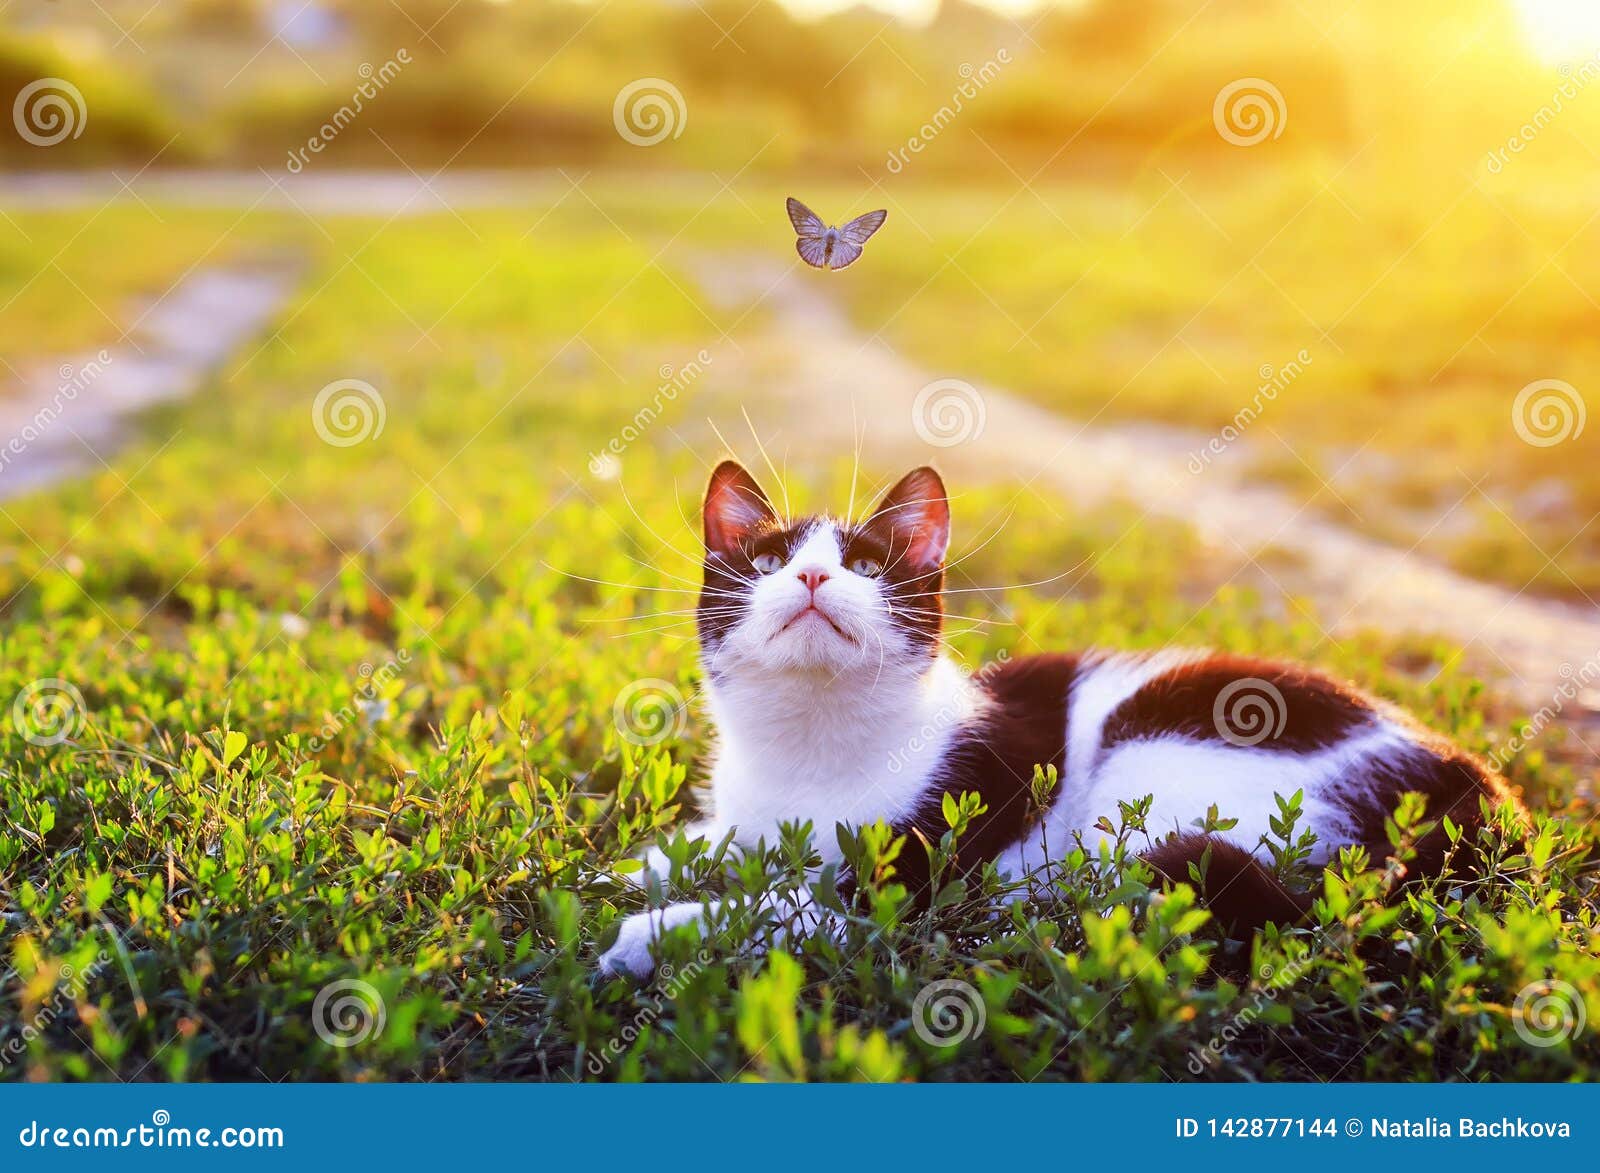 38+ Thousand Cute Blue Butterfly Color Royalty-Free Images, Stock